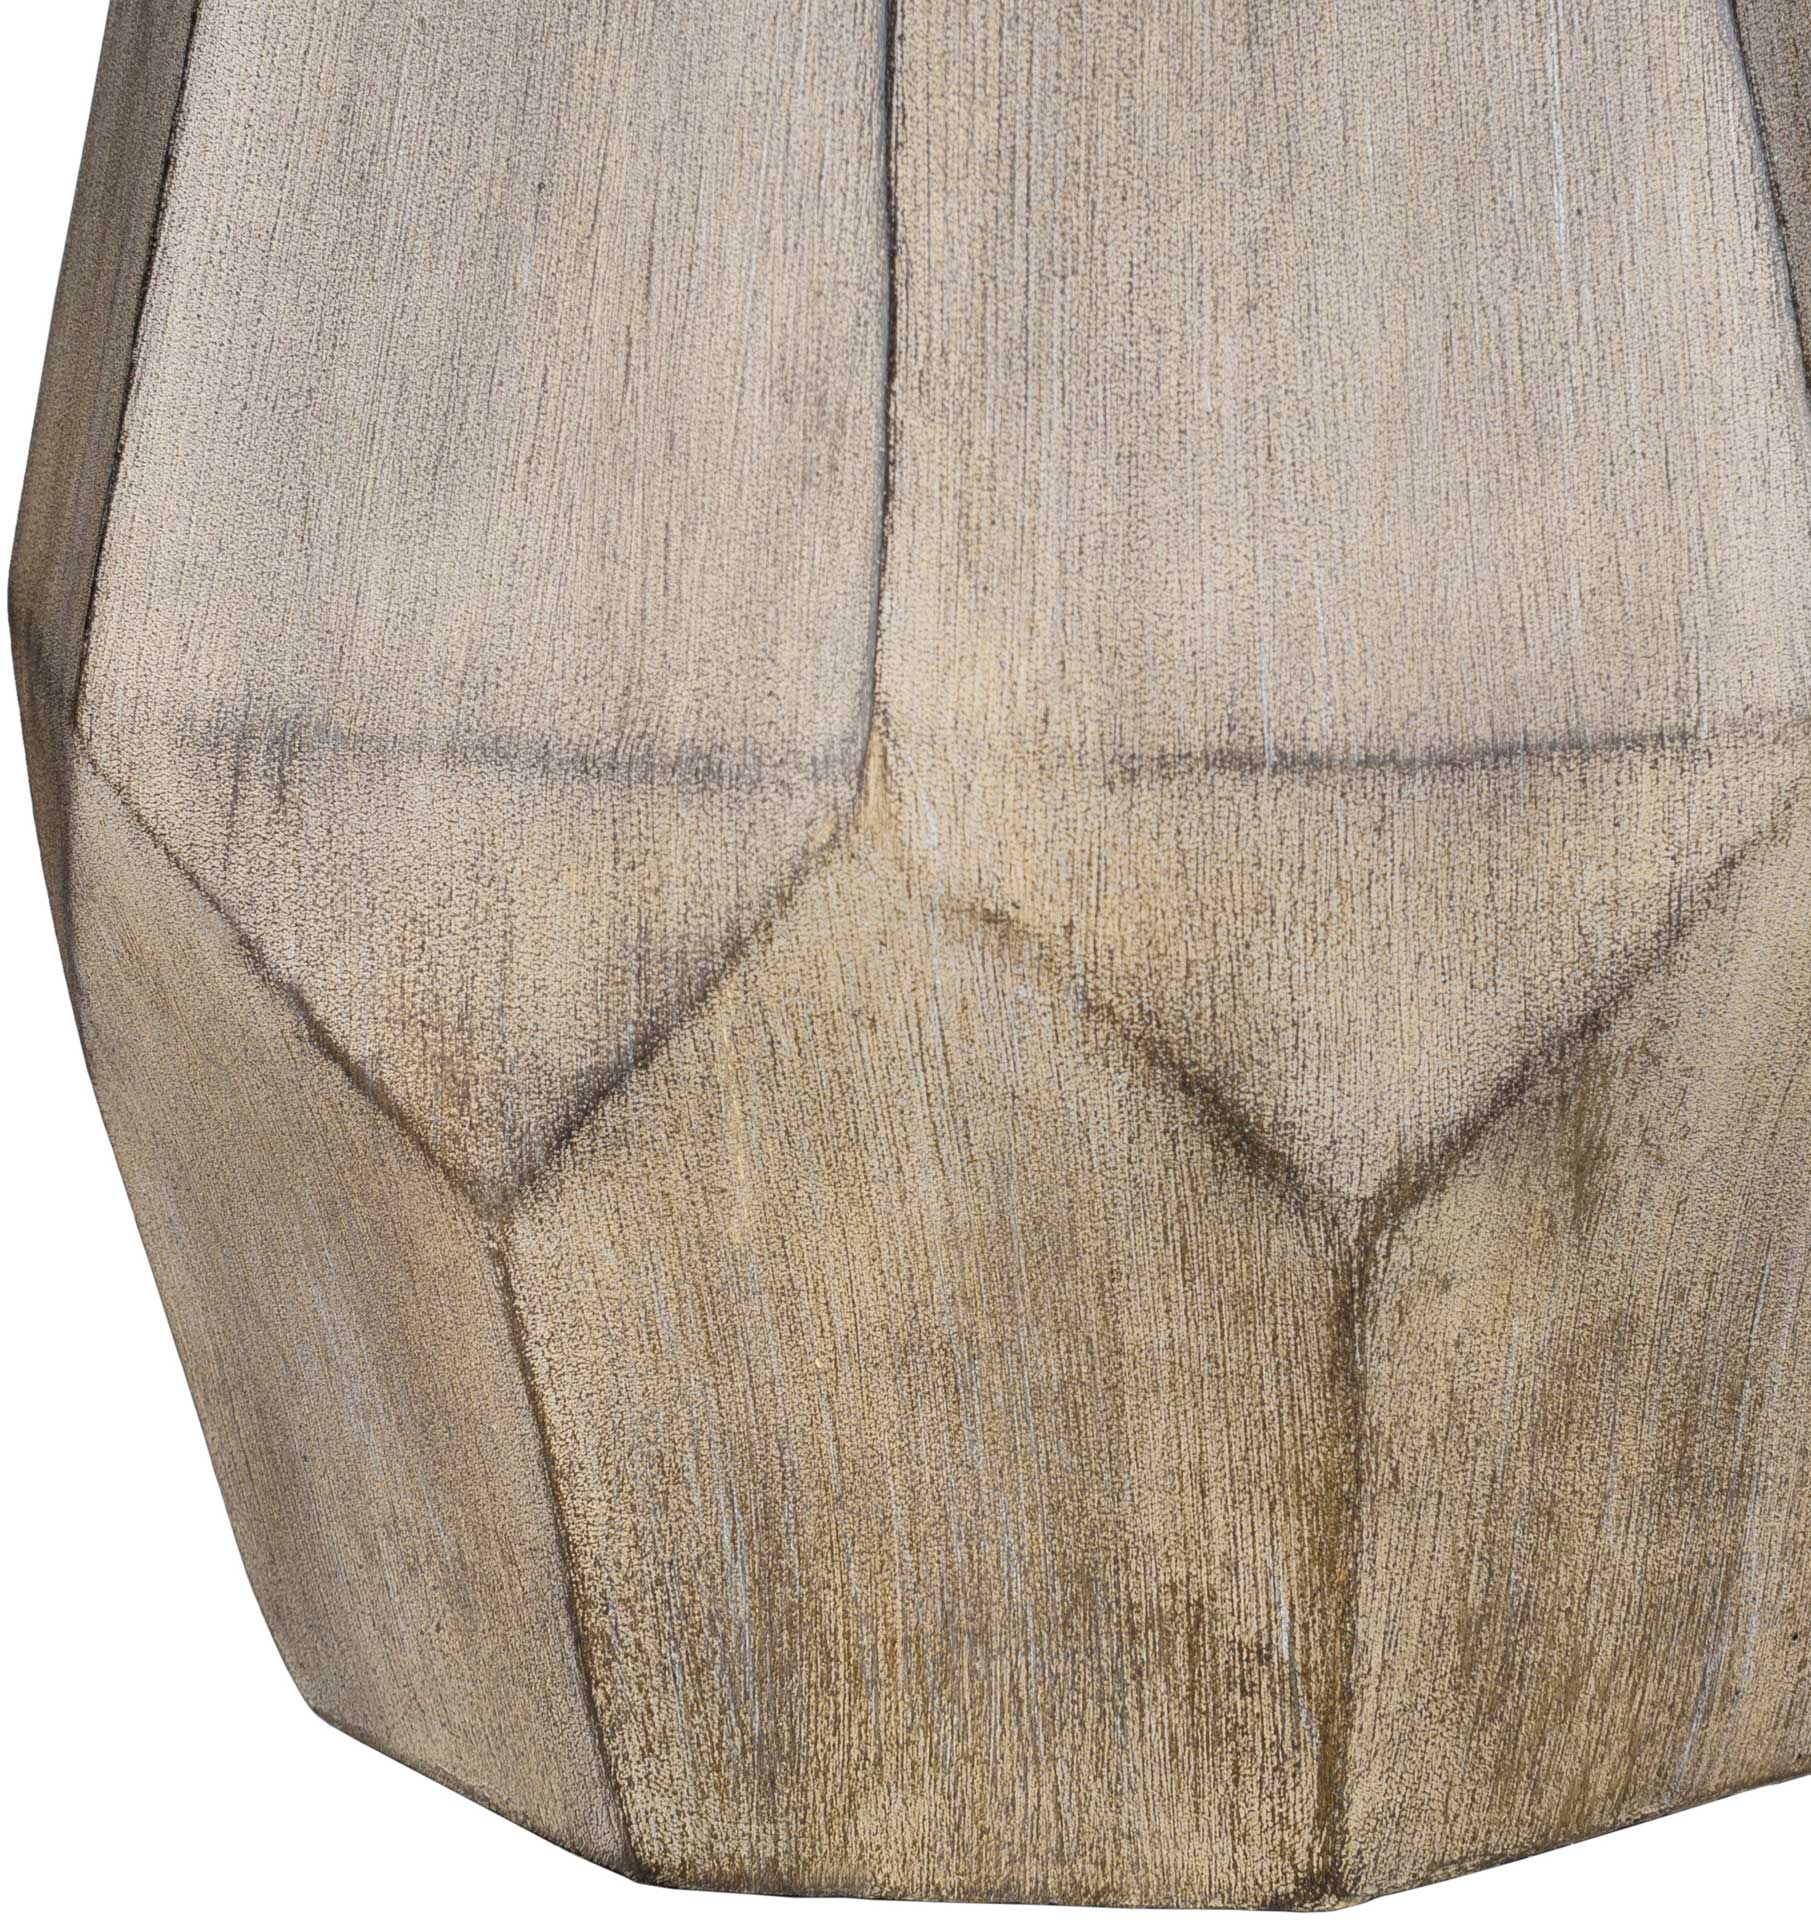 Dream Table Lamp Taupe/Slate Gray/Gray